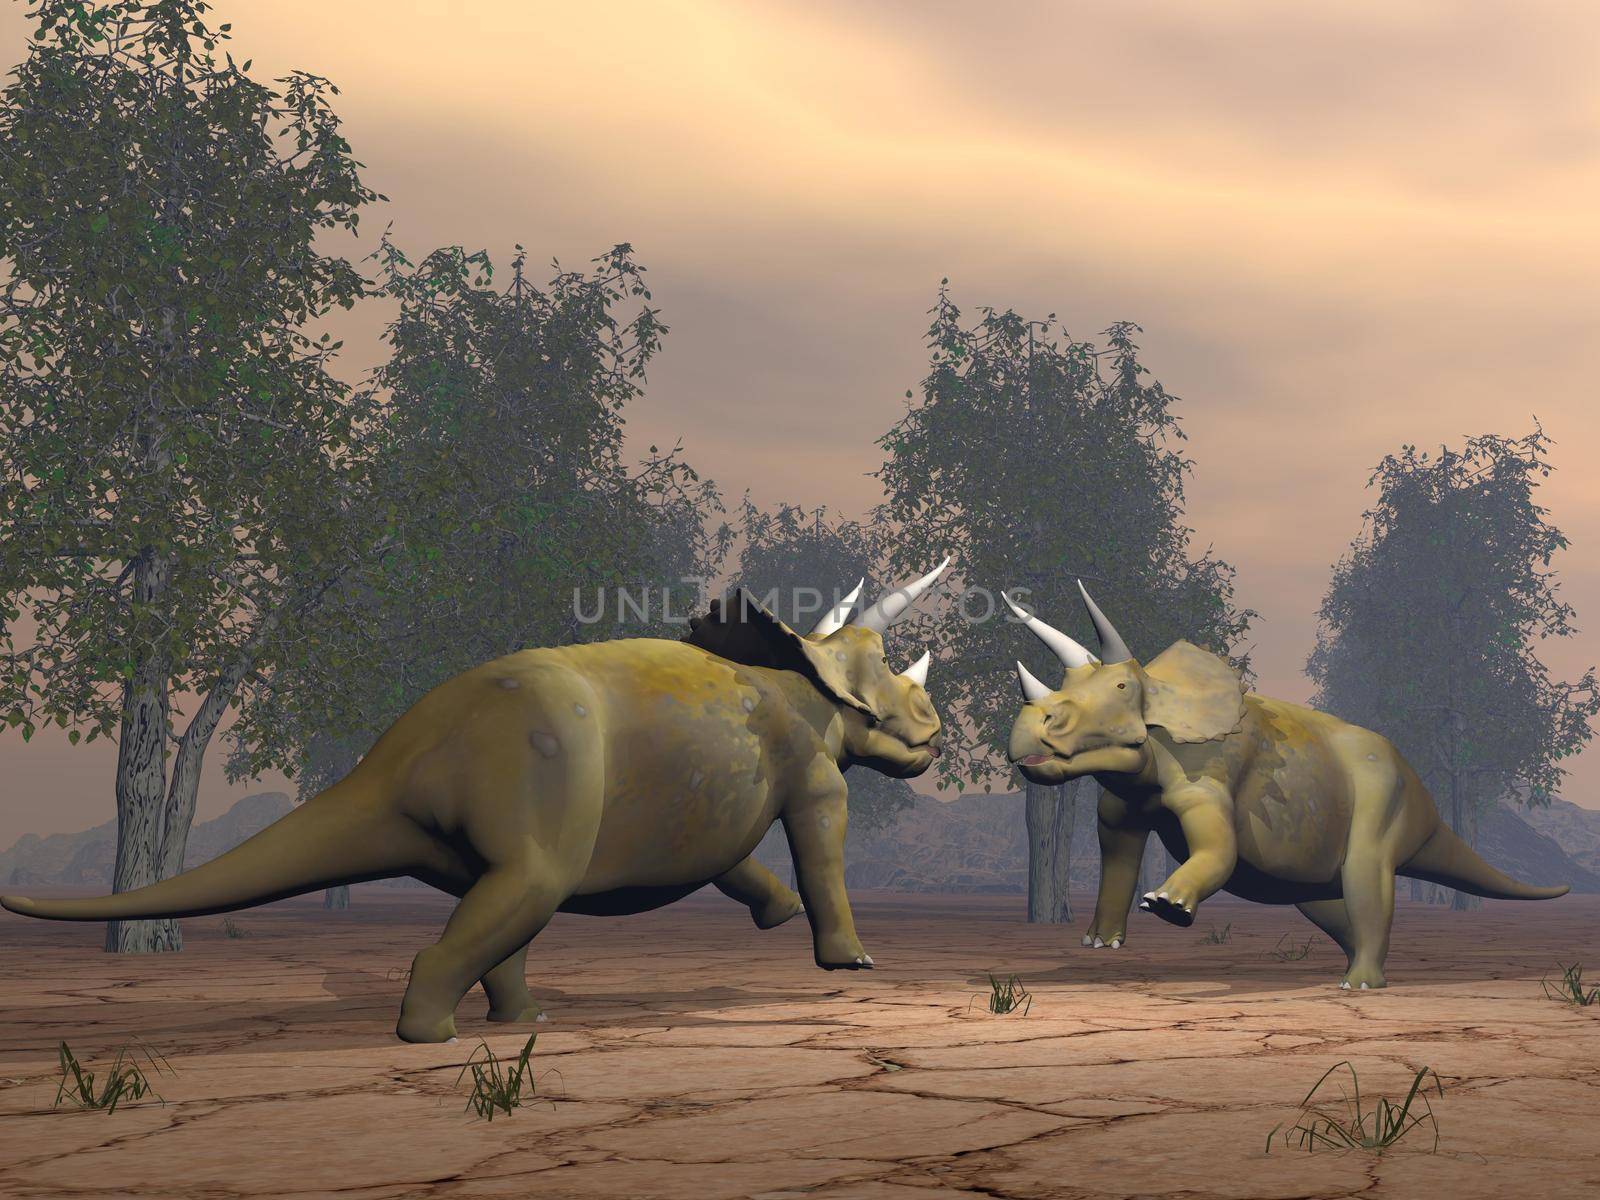 Triceratops dinosaurs fighting - 3D render by Elenaphotos21